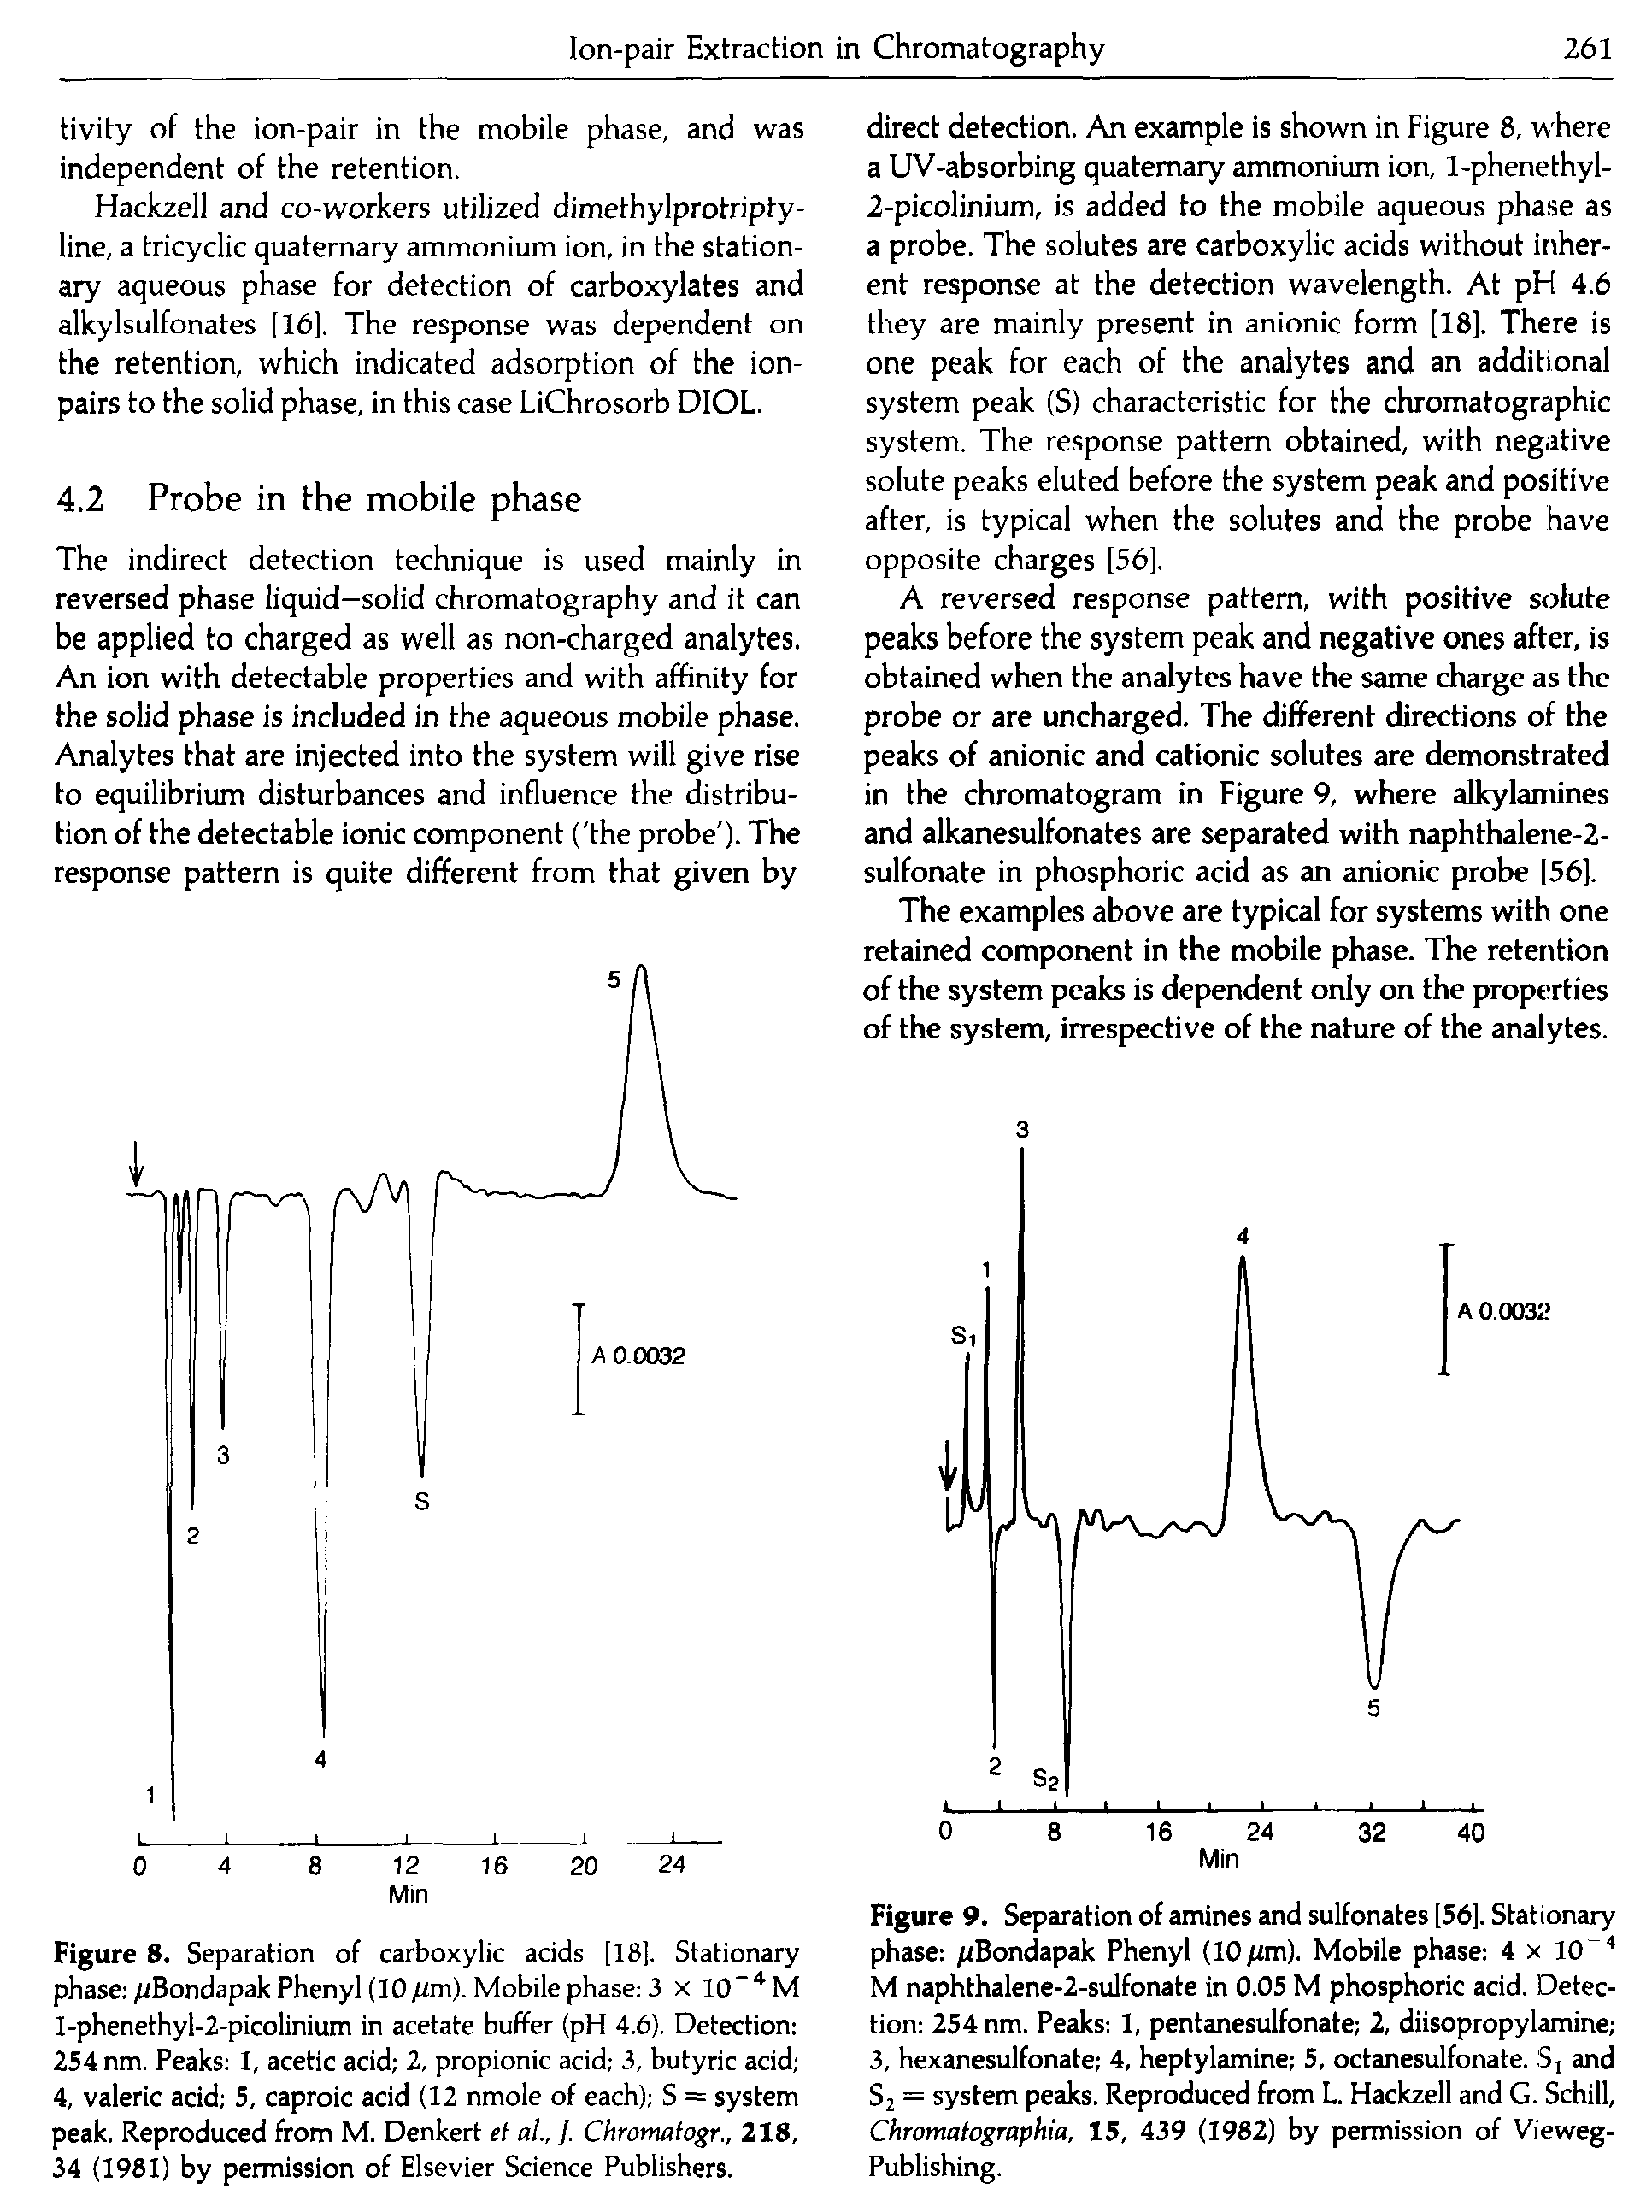 Figure 9. Separation of amines and sulfonates [56]. Stationary phase /iBondapak Phenyl (lOum). Mobile phase 4 x 10 M naphthalene-2-sulfonate in 0.05 M phosphoric acid. Detection 254 nm. Peaks 1, pentanesulfonate 2, diisopropylamine 3, hexanesulfonate 4, heptylamine 5, octanesulfonate. S, and Sj = system peaks. Reproduced from L. Hackzell and G. Schill, Chromatogmphia, 15, 439 (1982) by permission of Vieweg-Publishing.